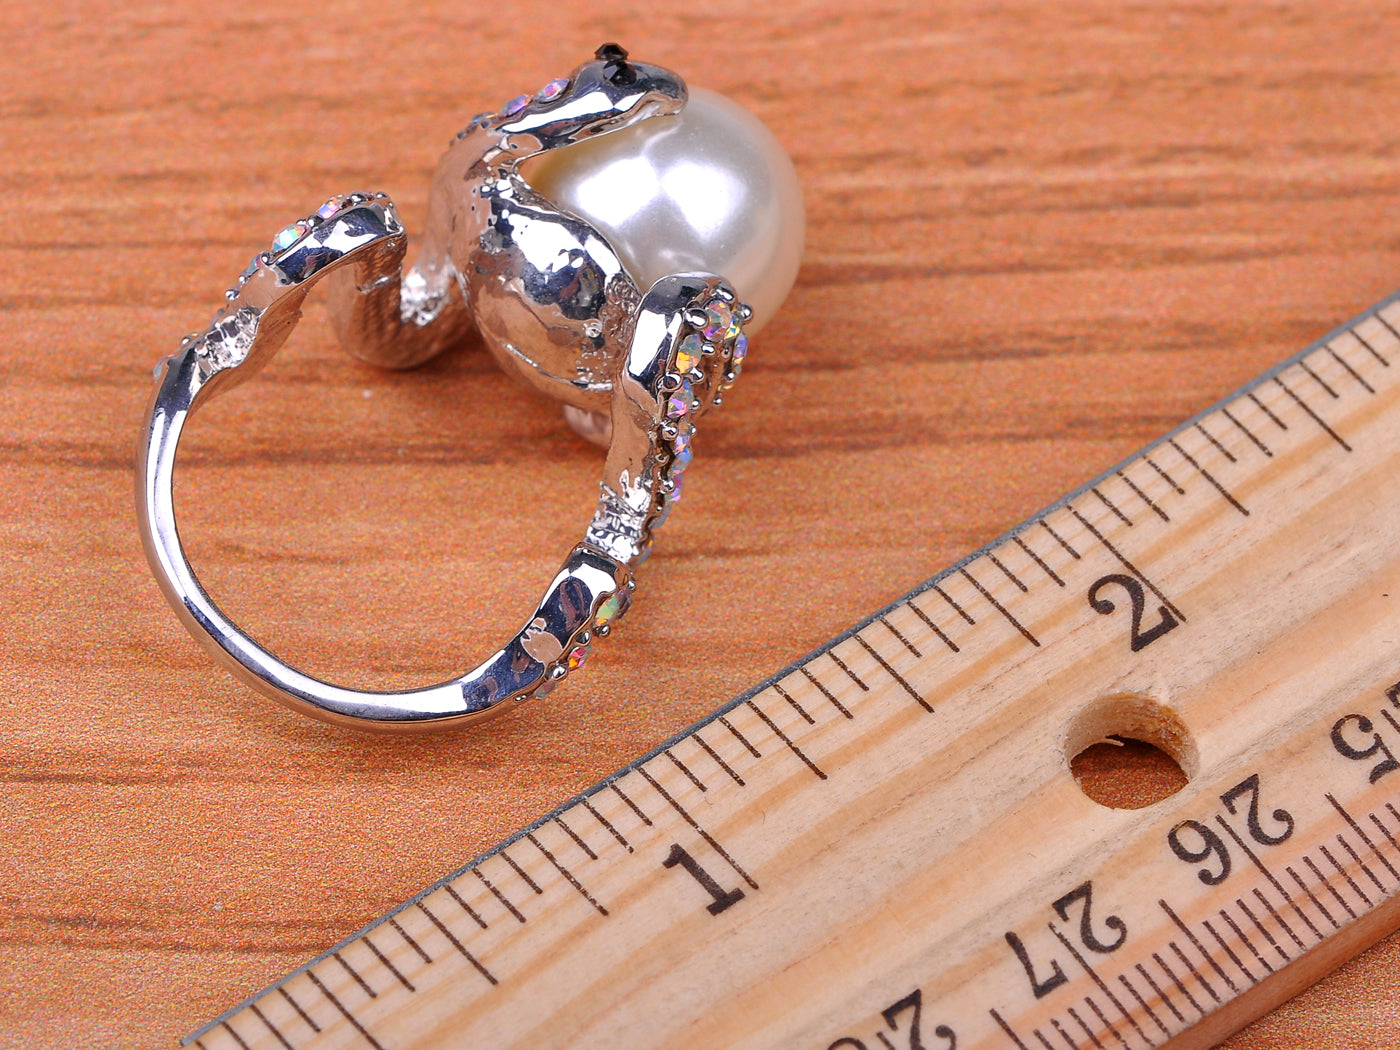 Opal Pearl Bead Snake Statement Ring